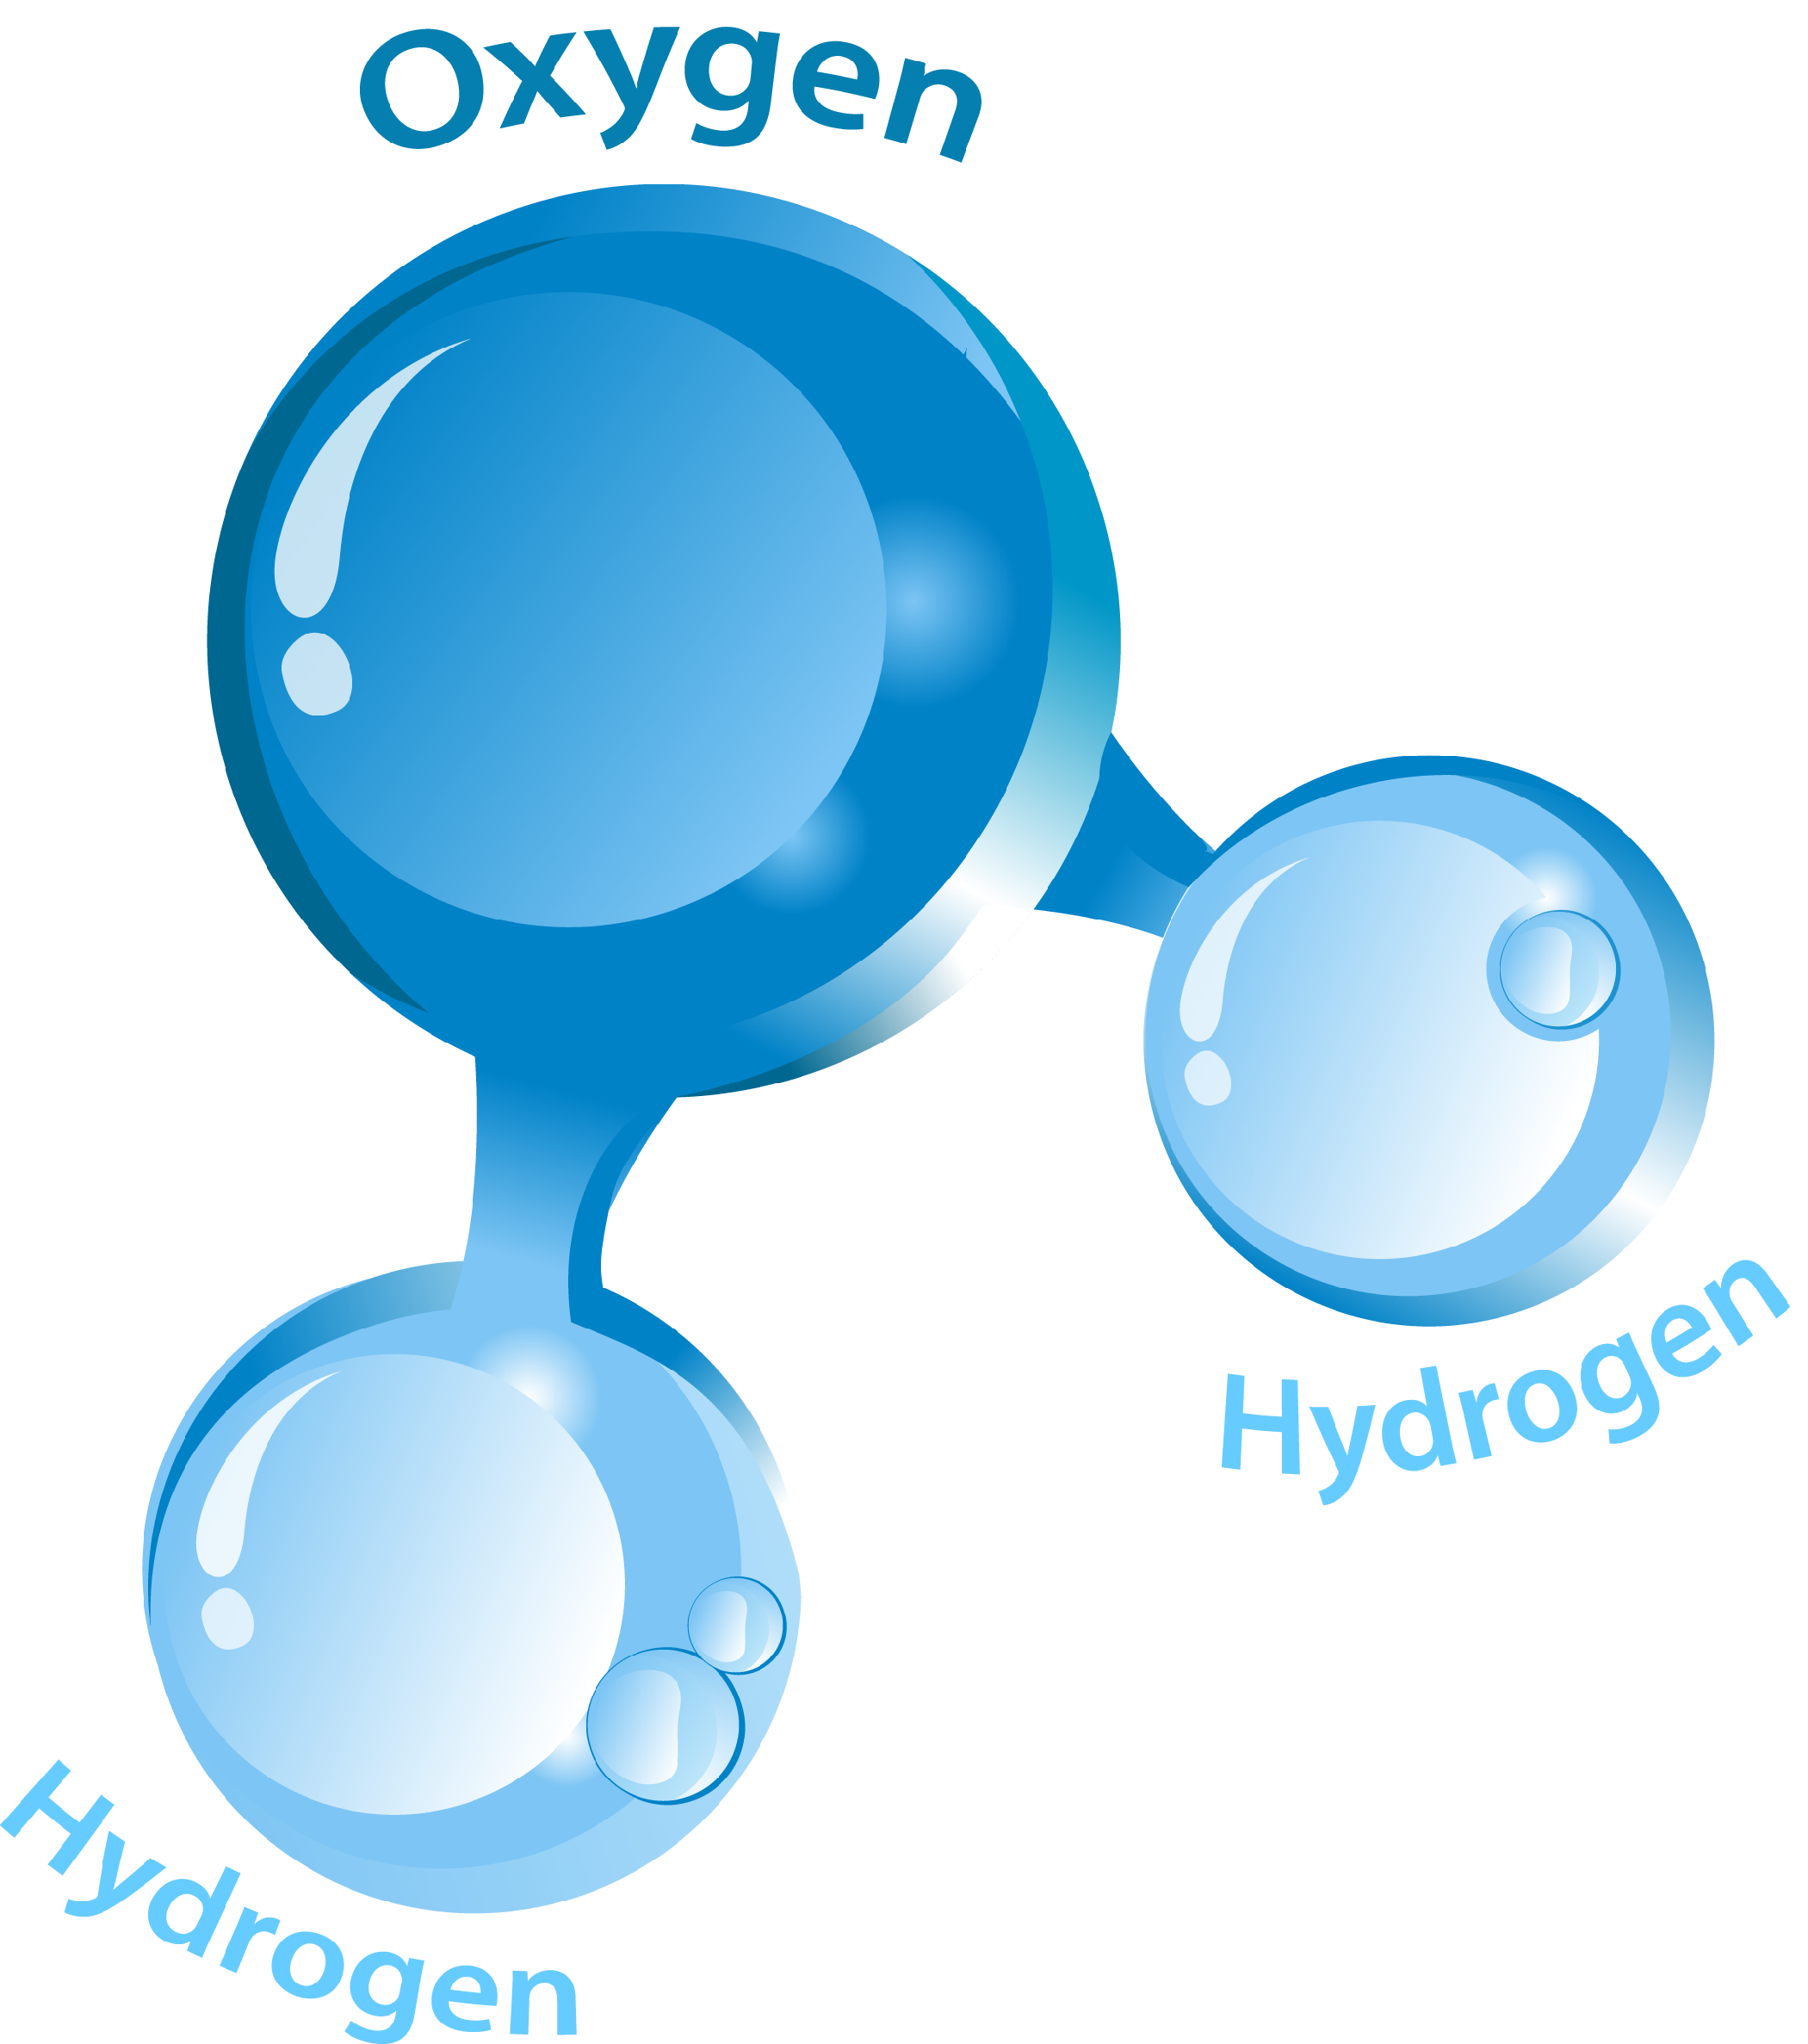 clipart water h2o